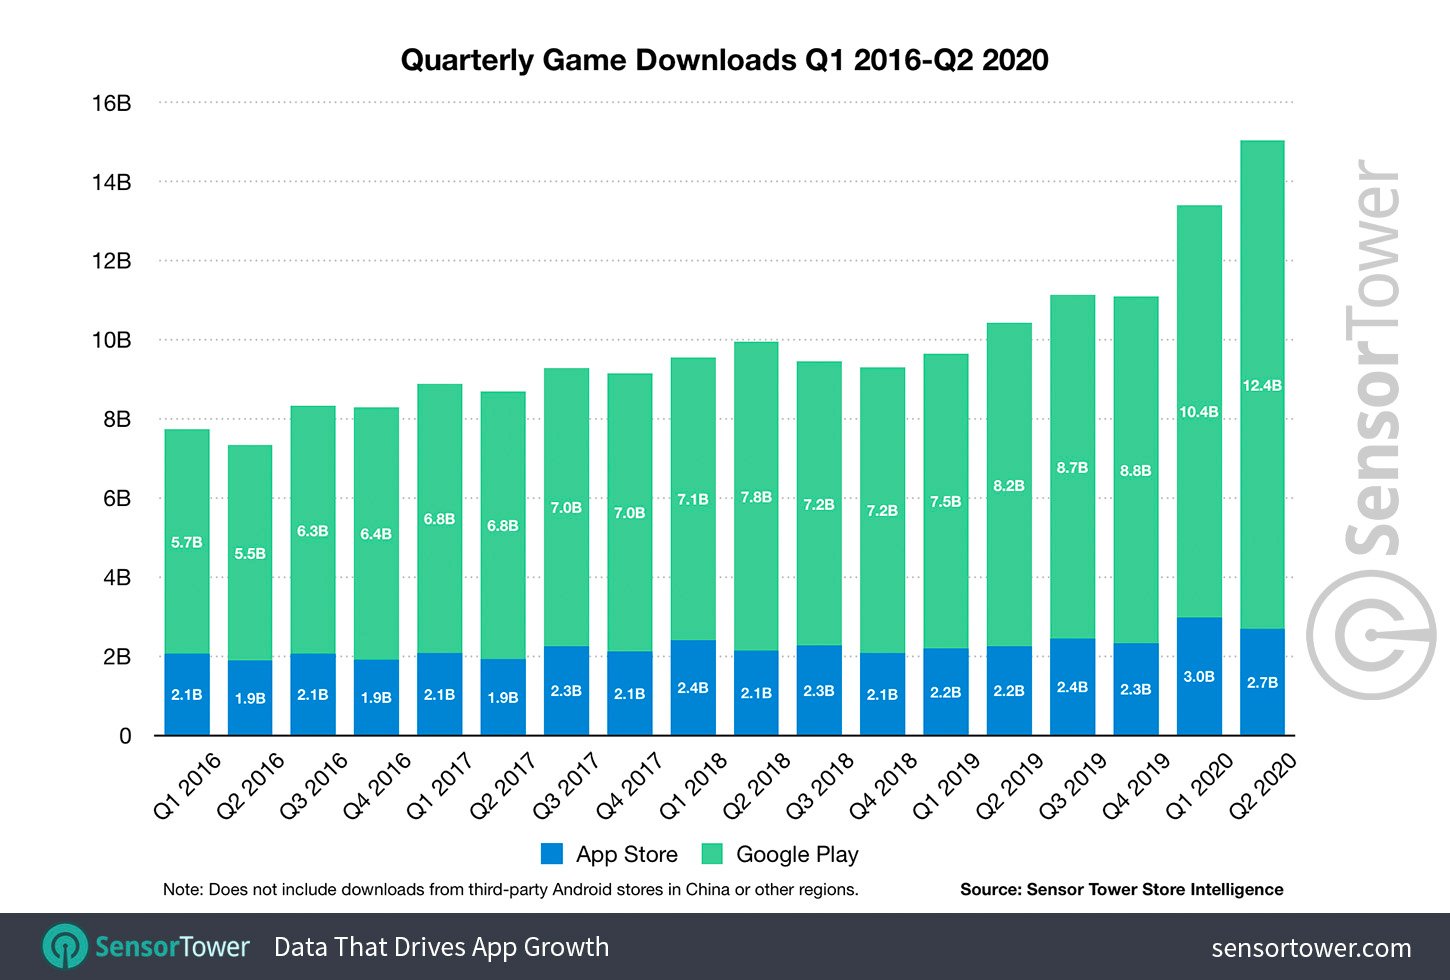 Mobile Game Downloads